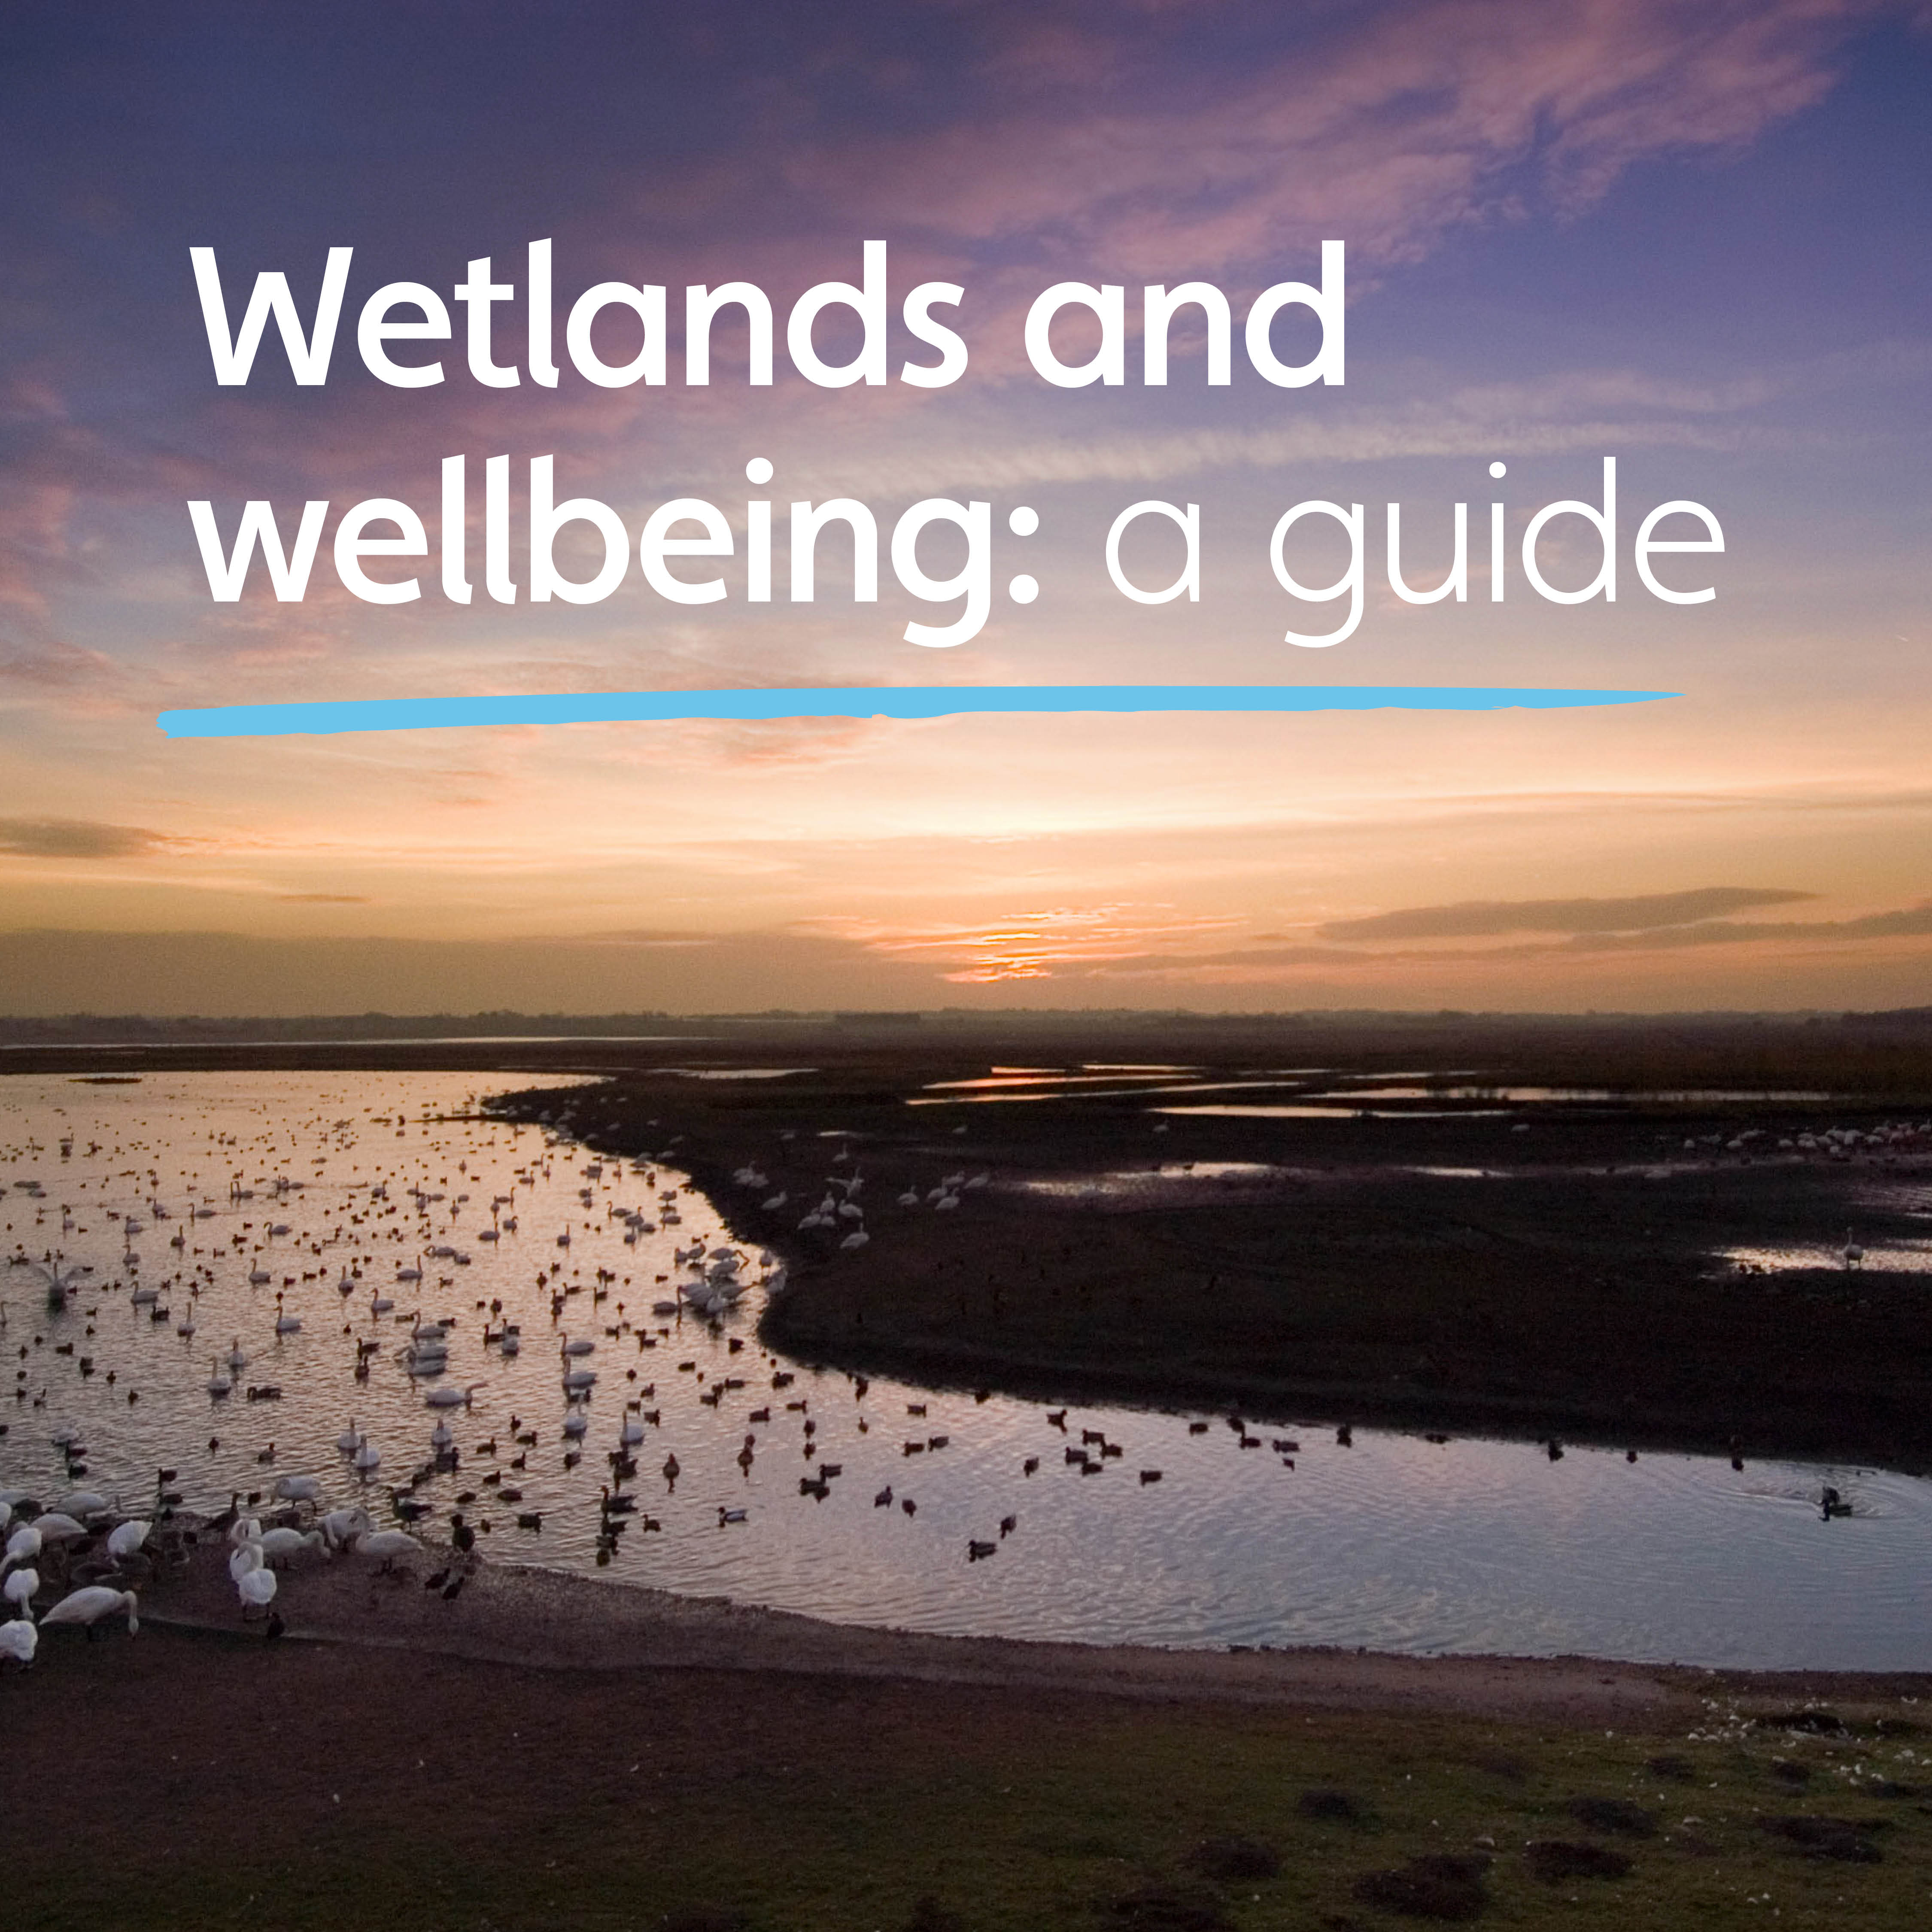 WWT & Mental Health Foundation launch wellbeing guide